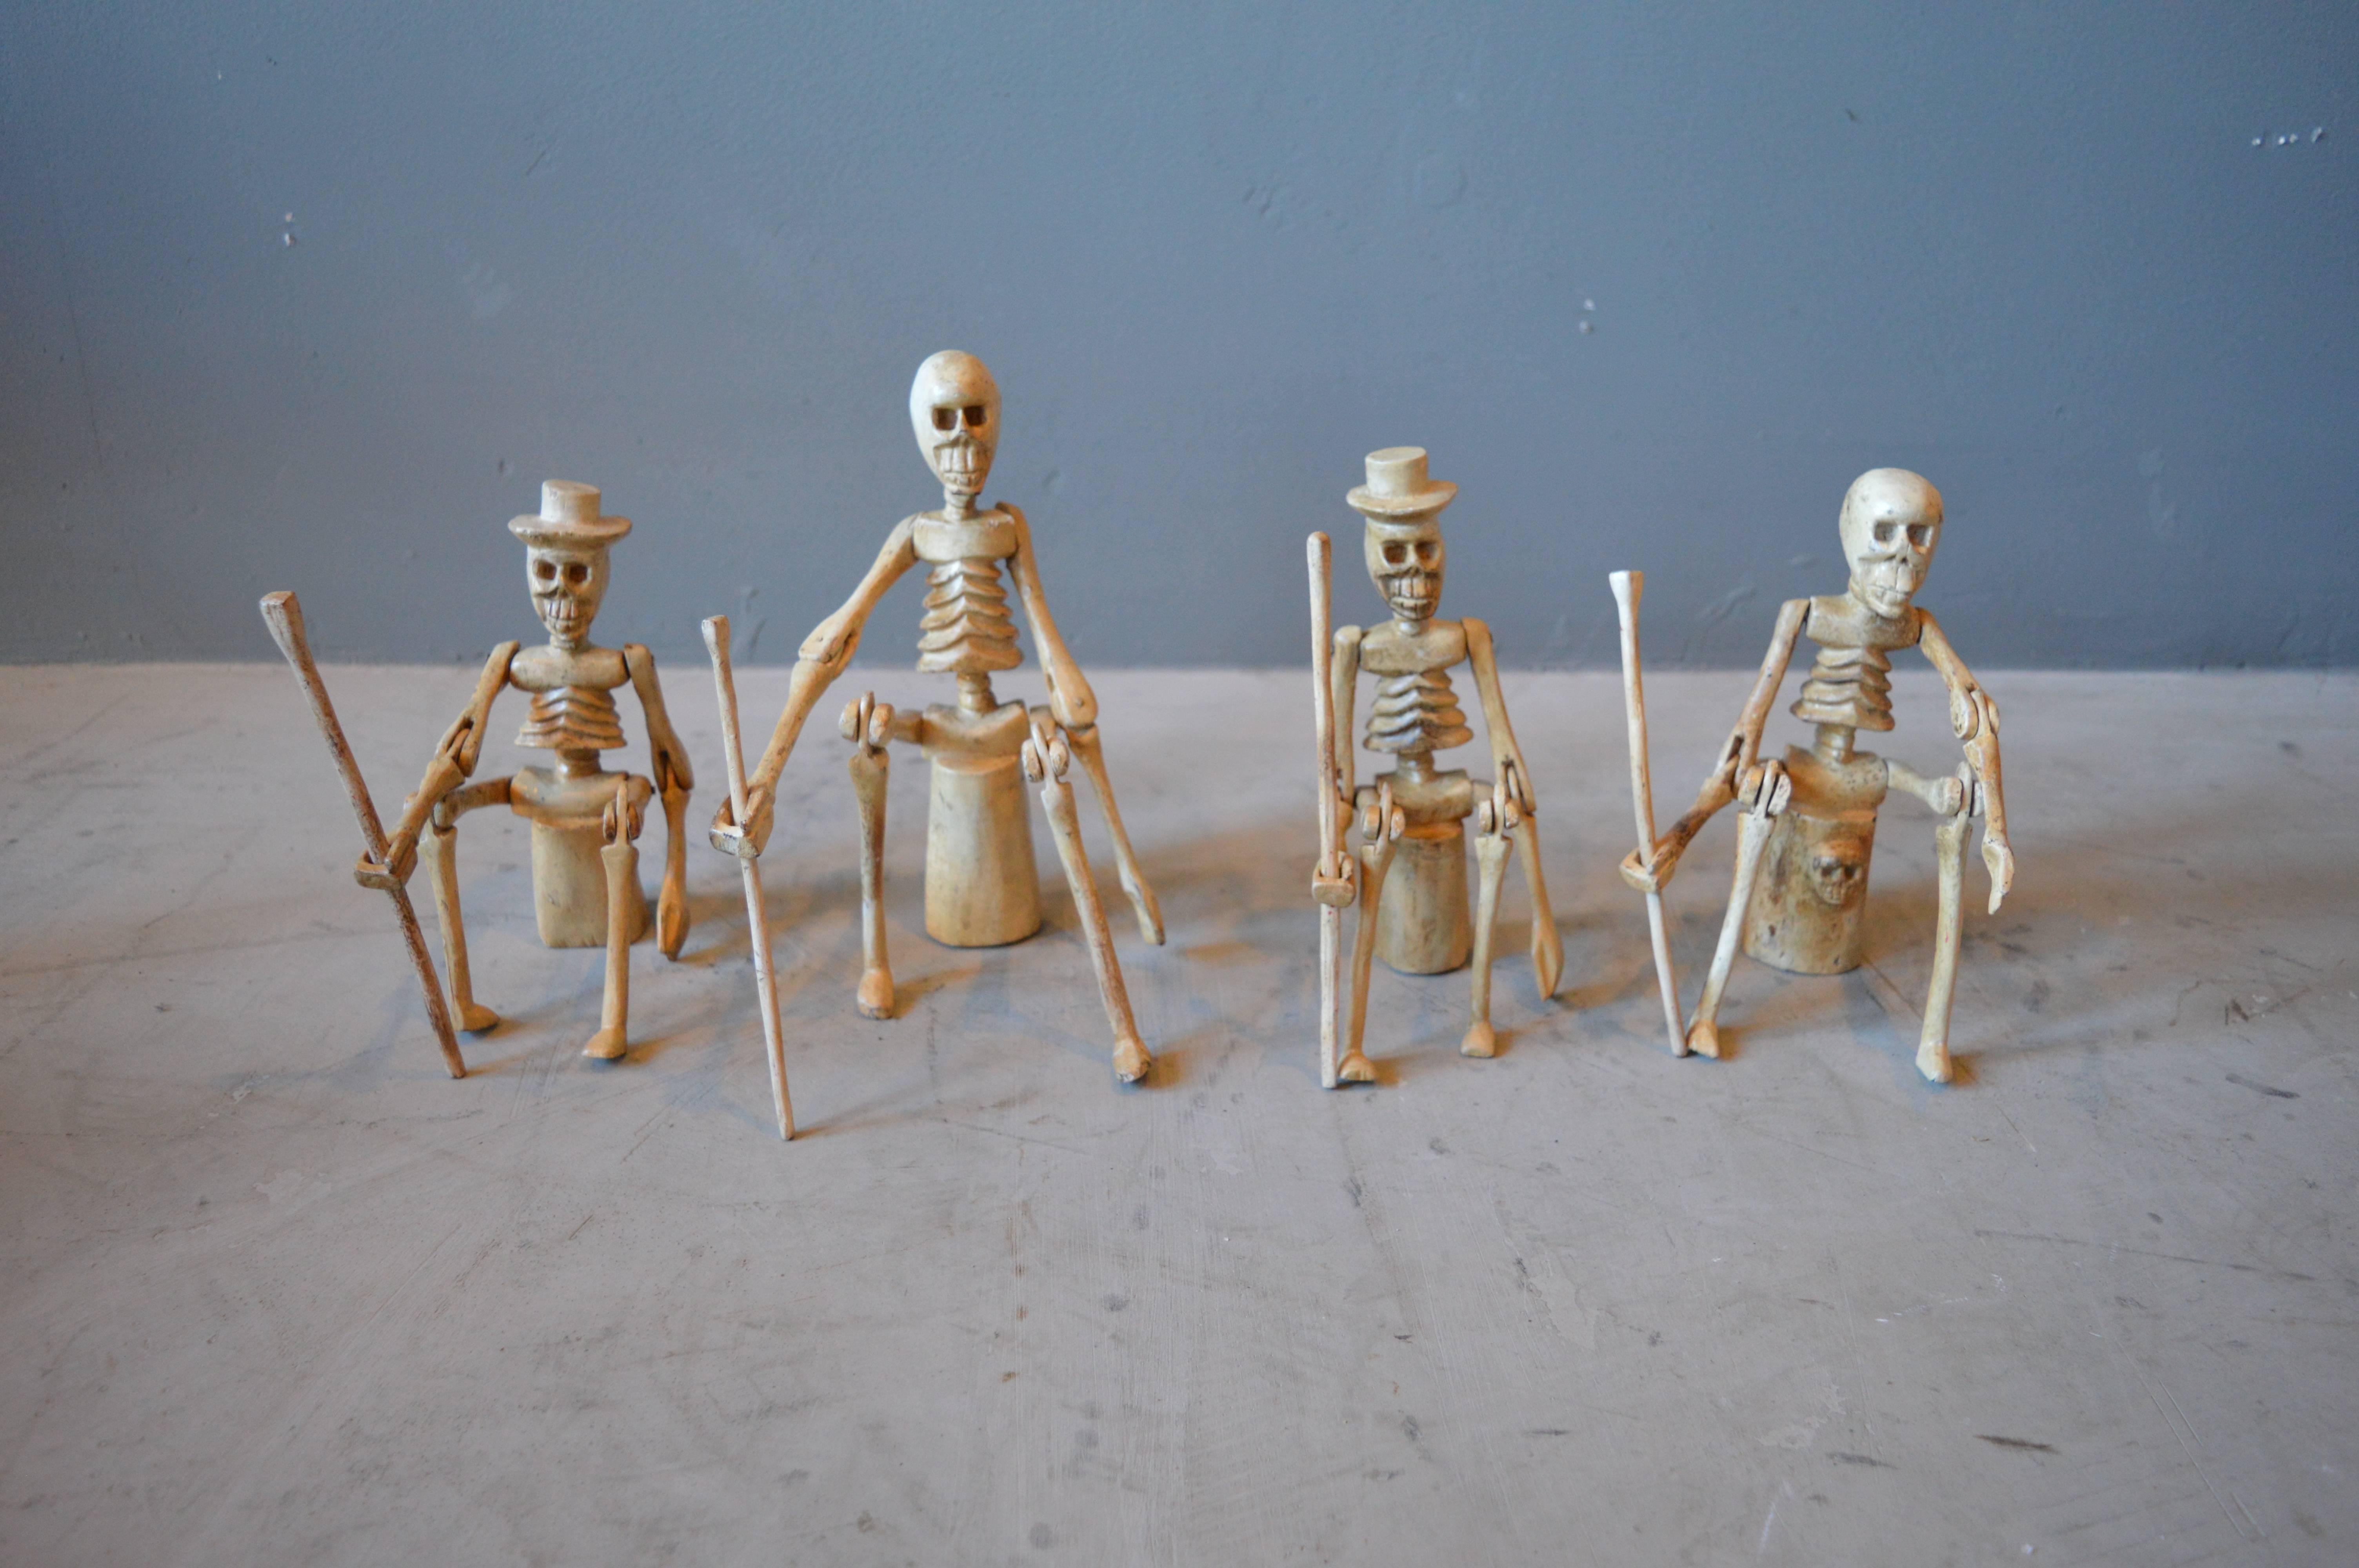 Interesting set of 4 articulating skeletons from South America. Arms and legs articulate. Each skeleton is holding a removable walking stick. Very cool set and sculpture. Excellent detail.

Each piece is roughly 6